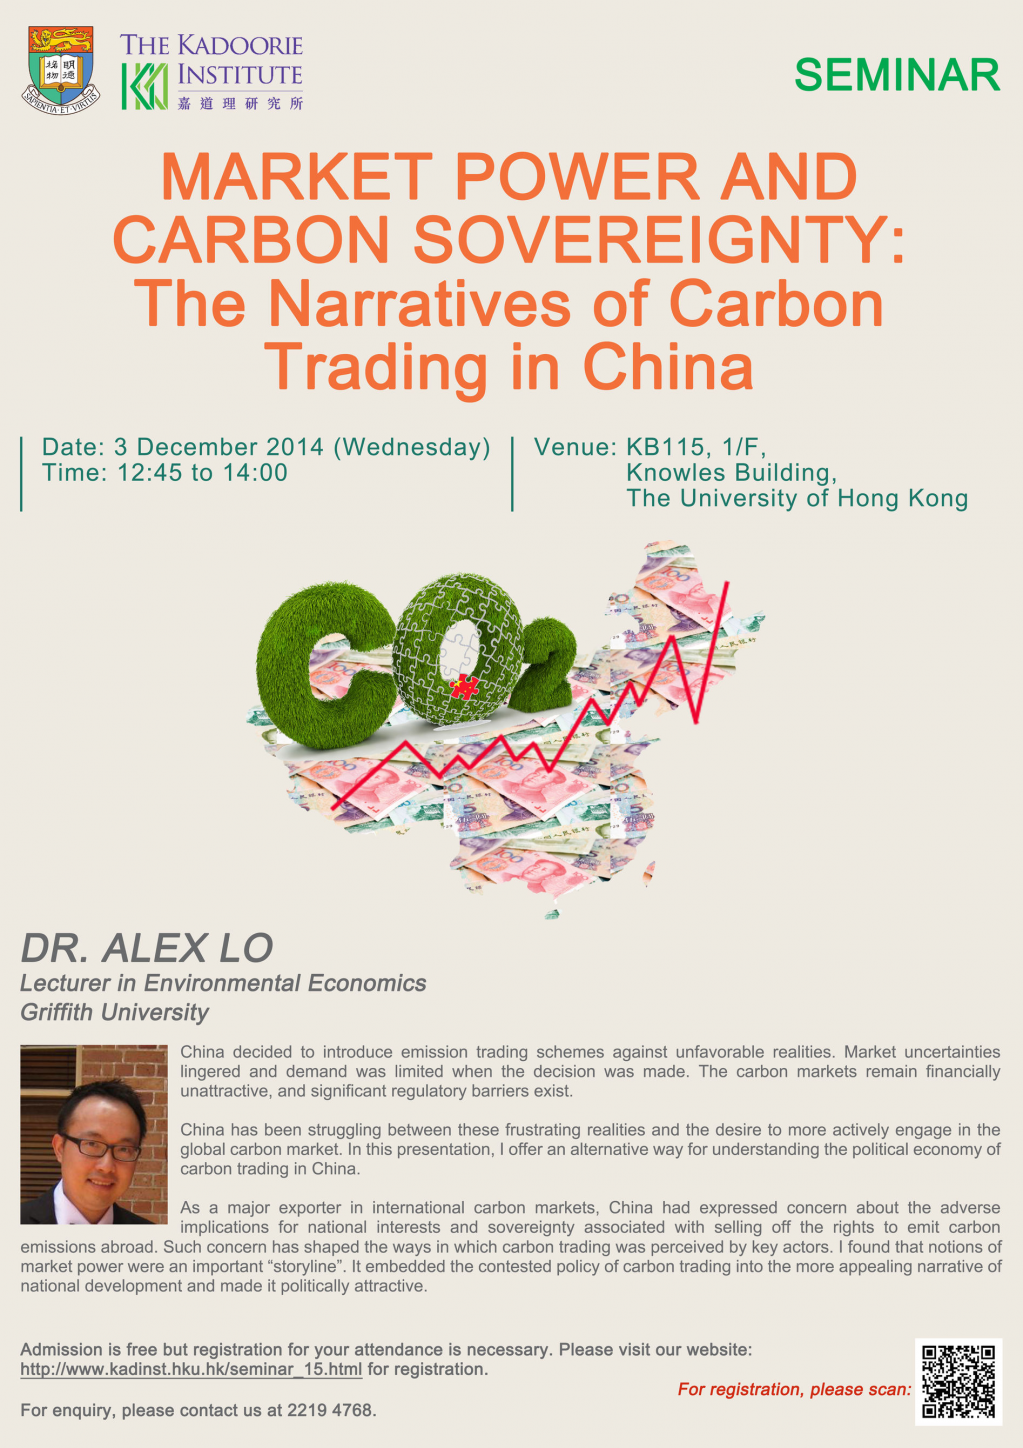 Seminar on Market Power and Carbon Sovereignty